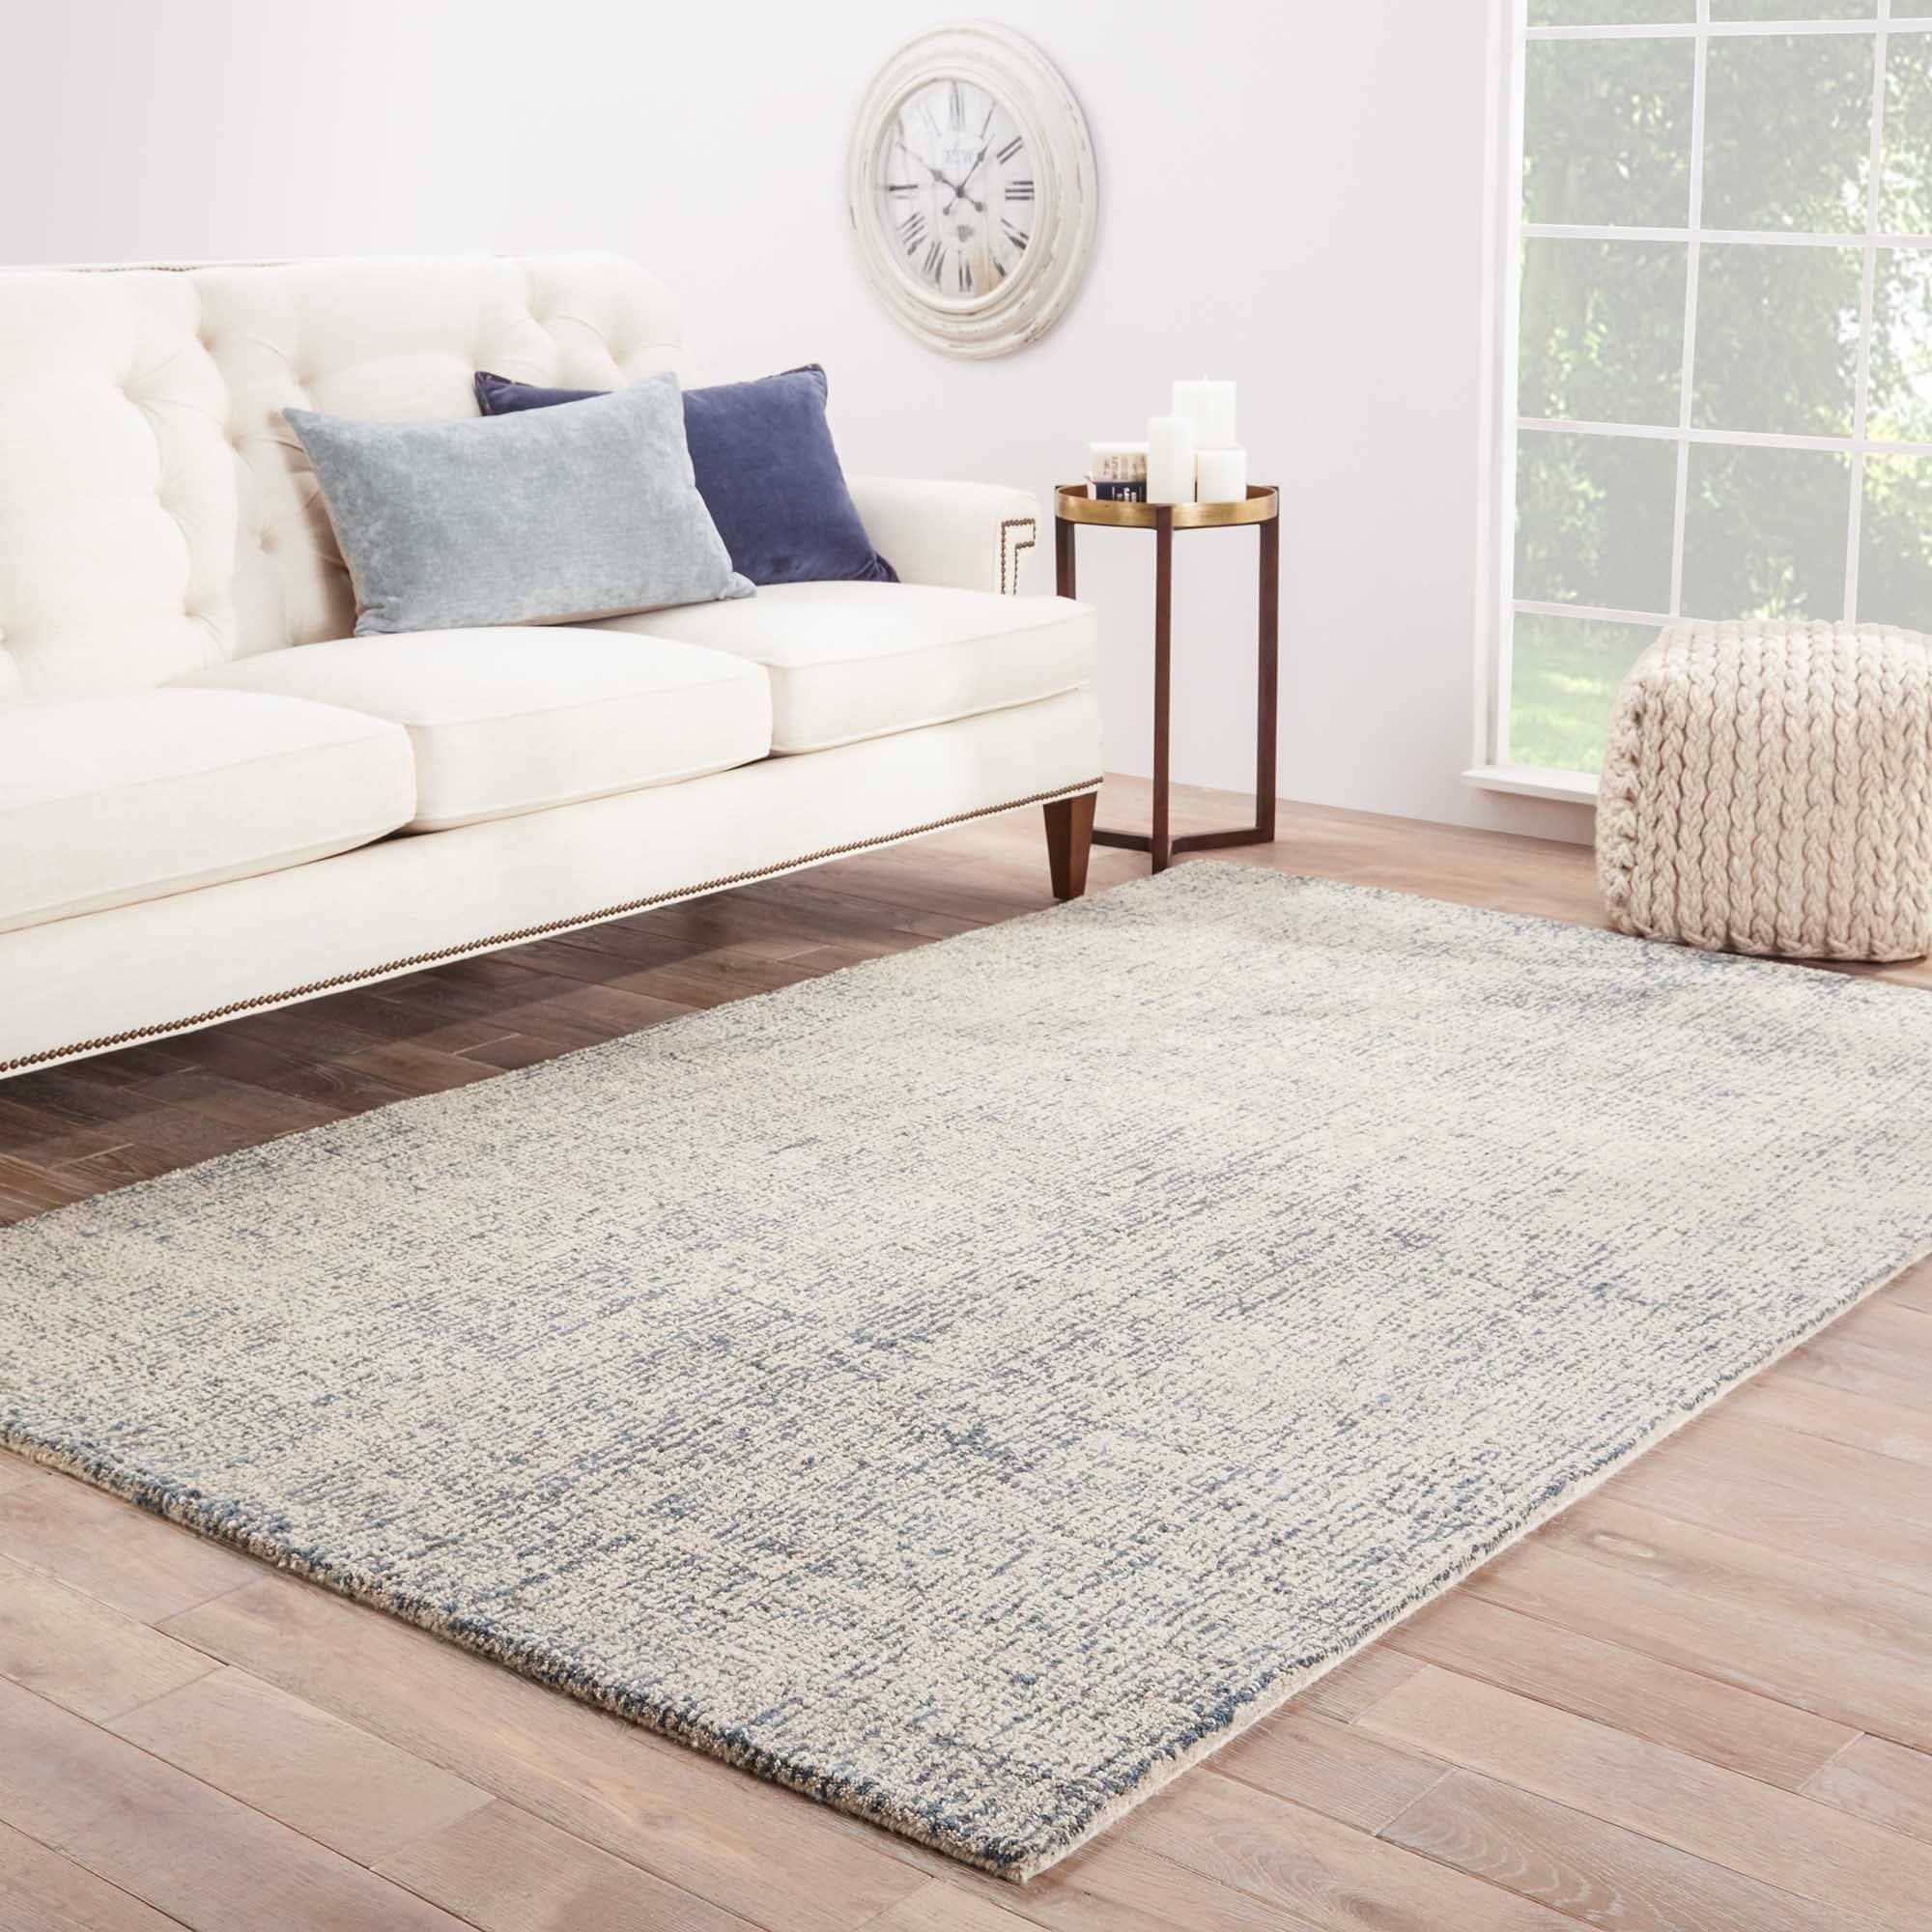 Hand made Ivory/ Blue Wool Easy Care Rug (2x3)